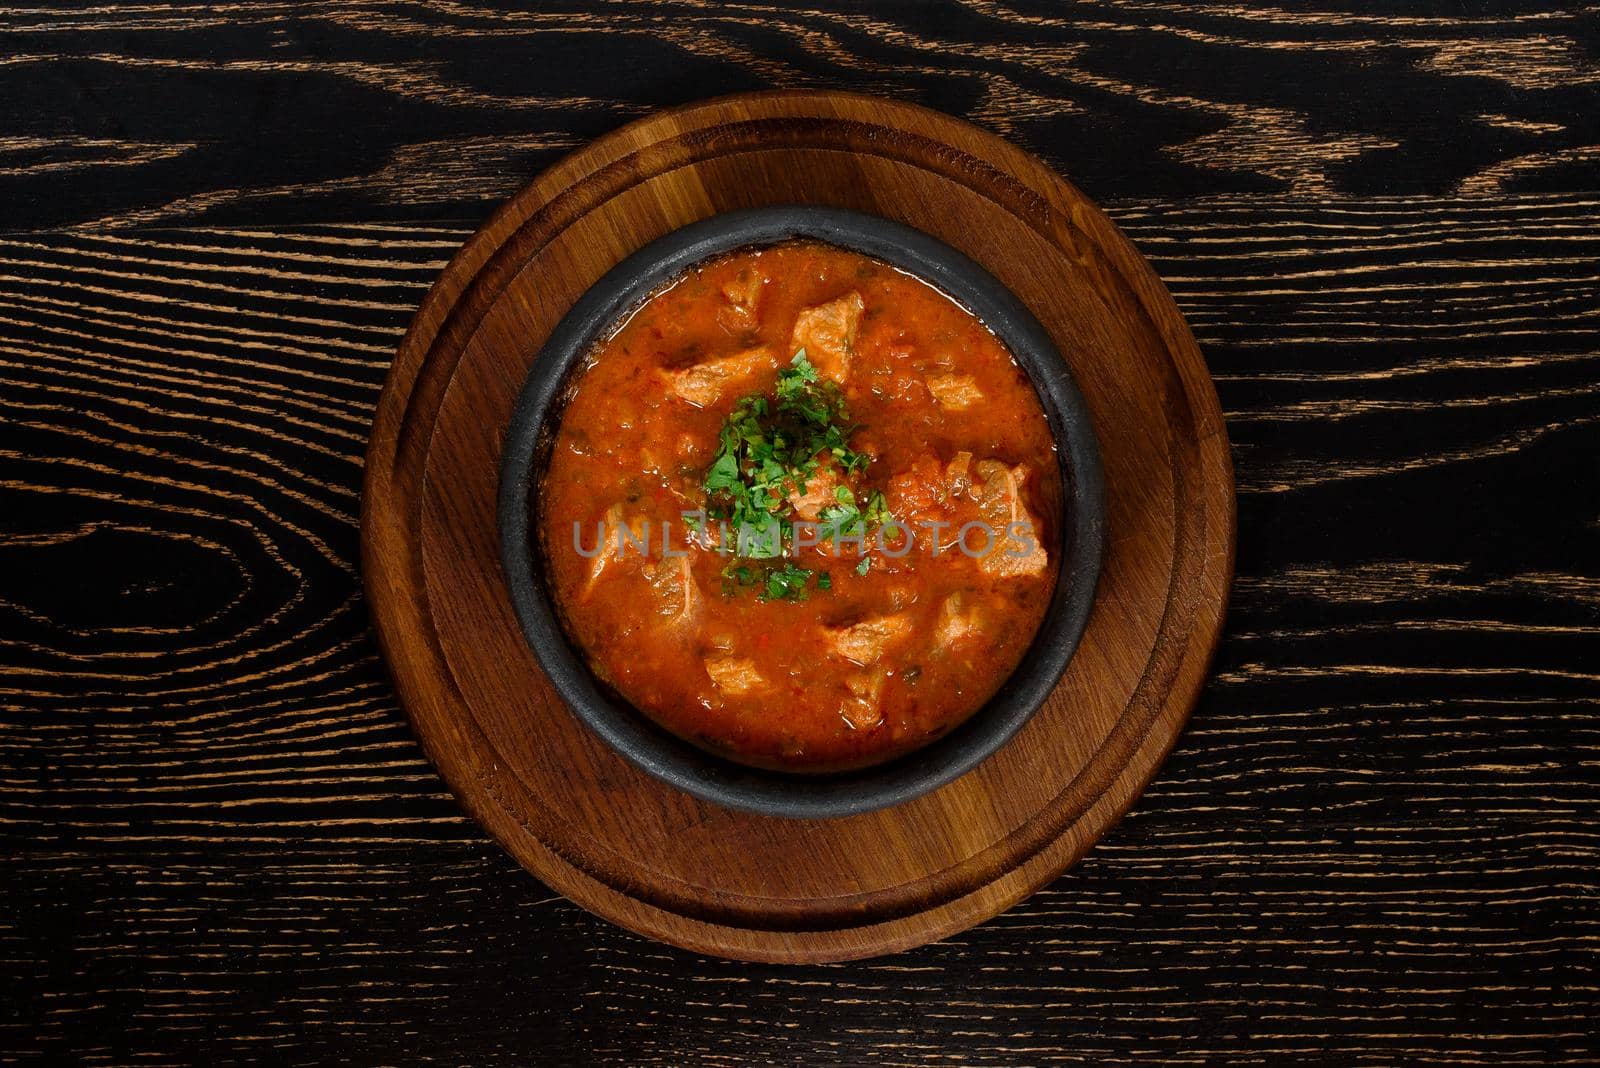 Meat in tomato sauce in a black clay plate on a wooden board on a dark wooden table.